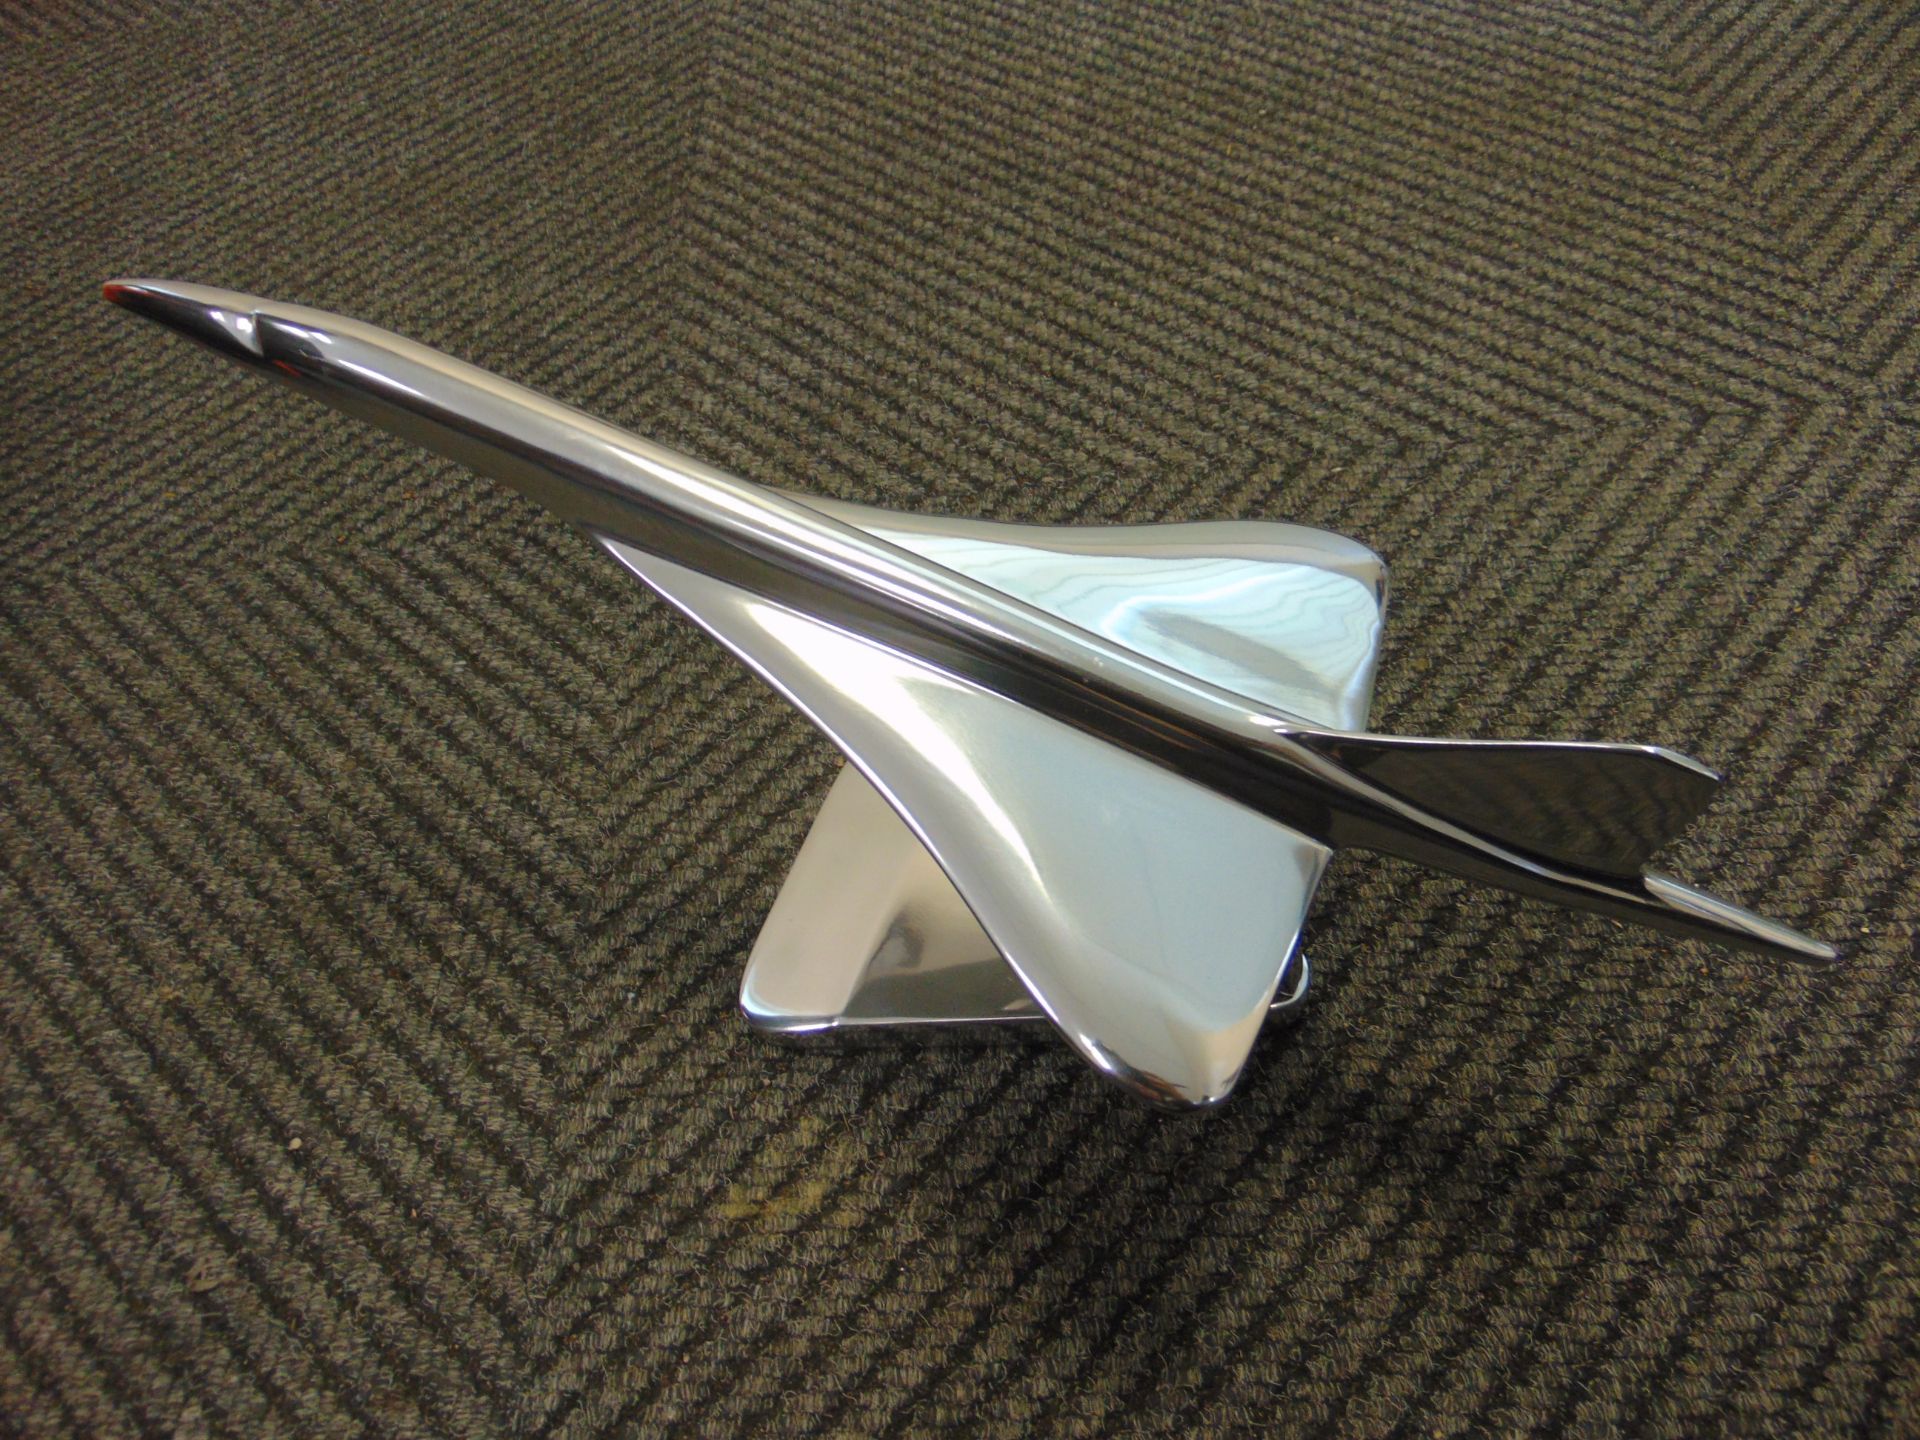 STUNNING POLISHED ALLUMINUM DESK TOP MODEL OF A CONCORD IN FLIGHT ON STAND - Image 12 of 12